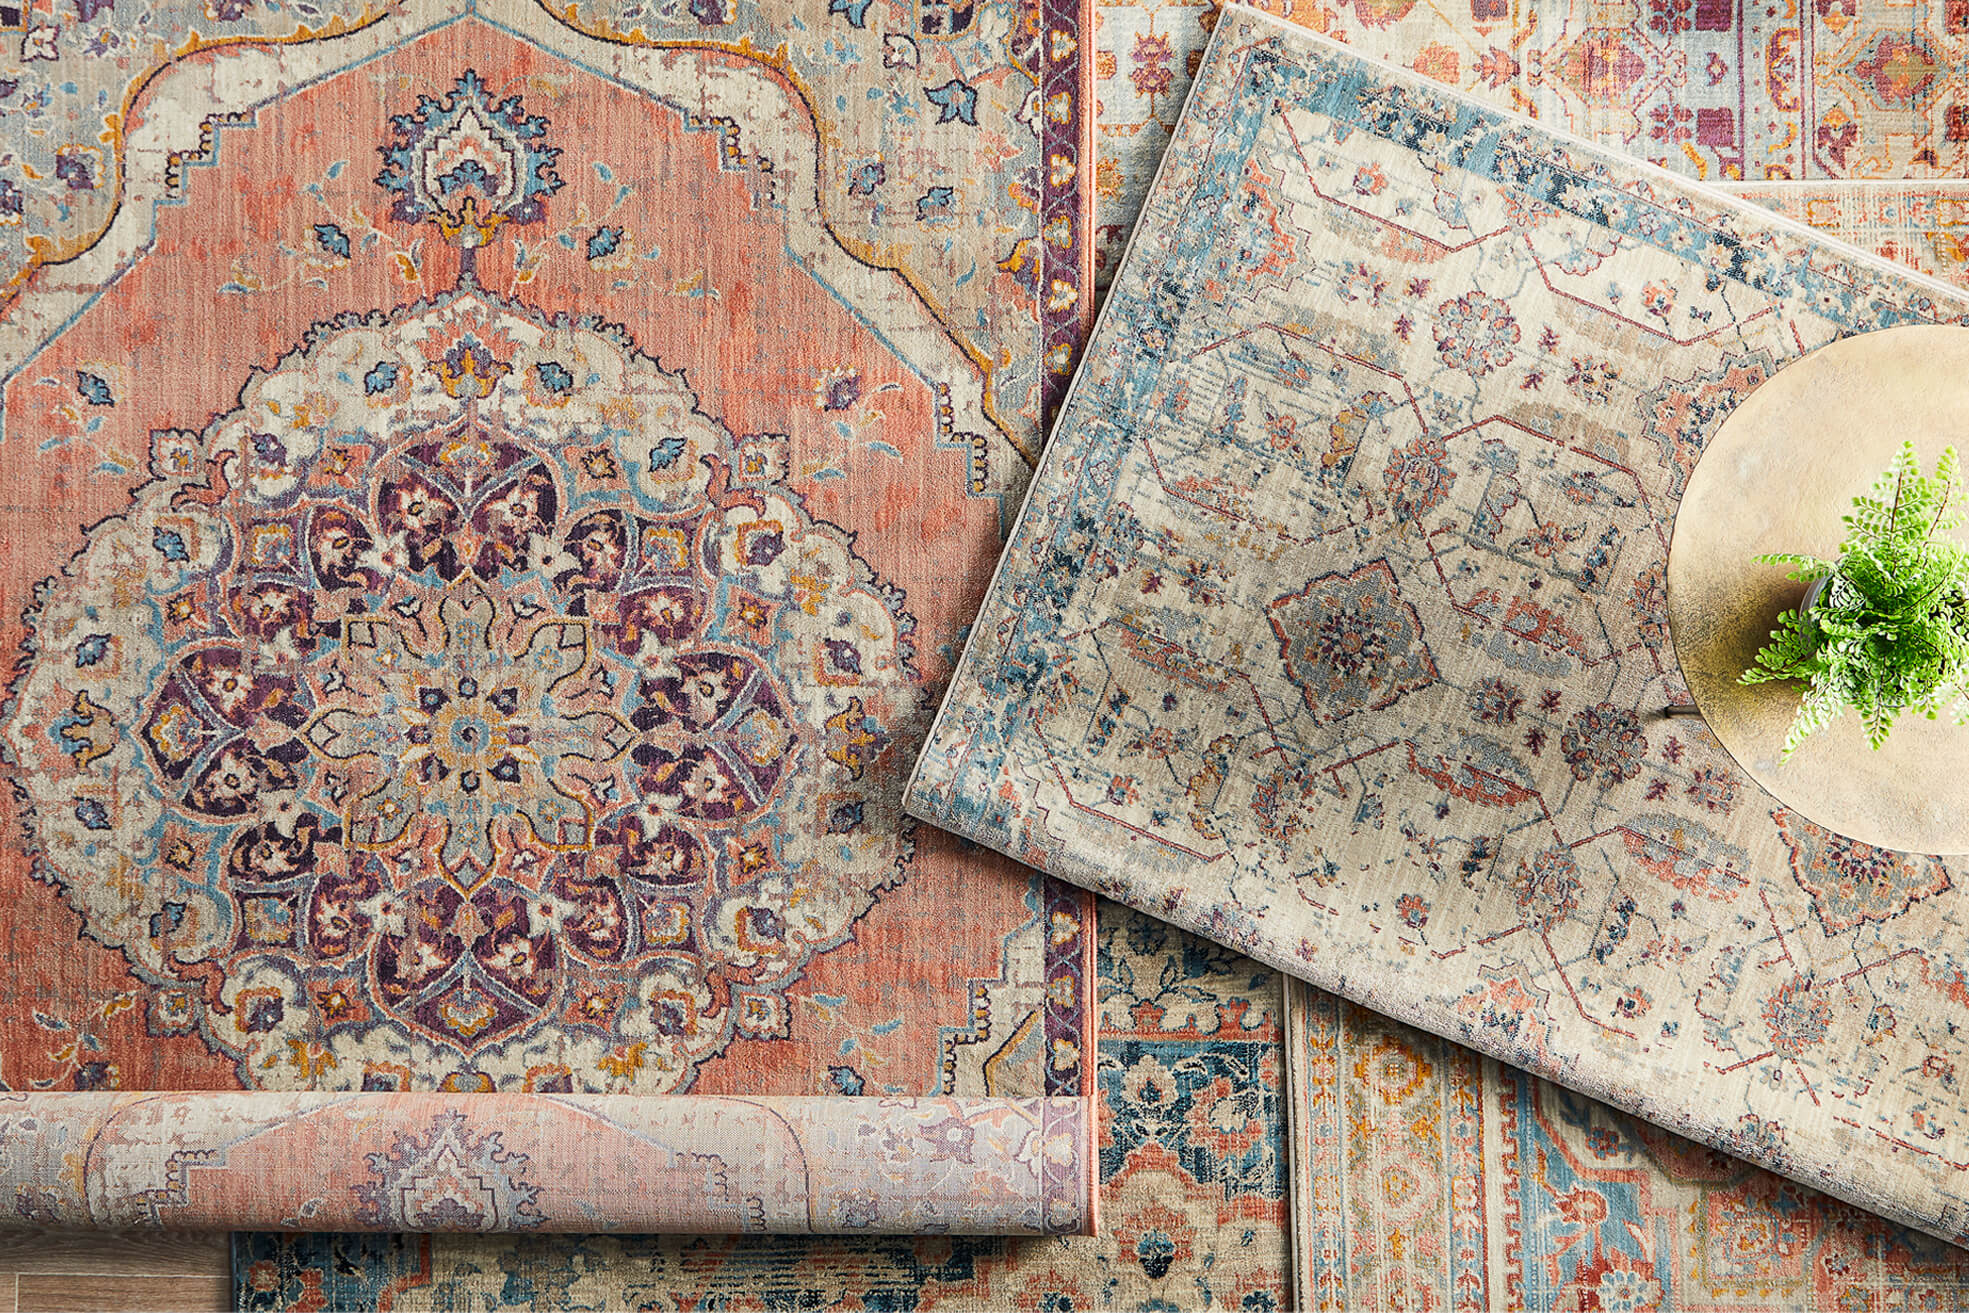 Beyond Decor: How Quality Rugs Can Be Valuable Assets